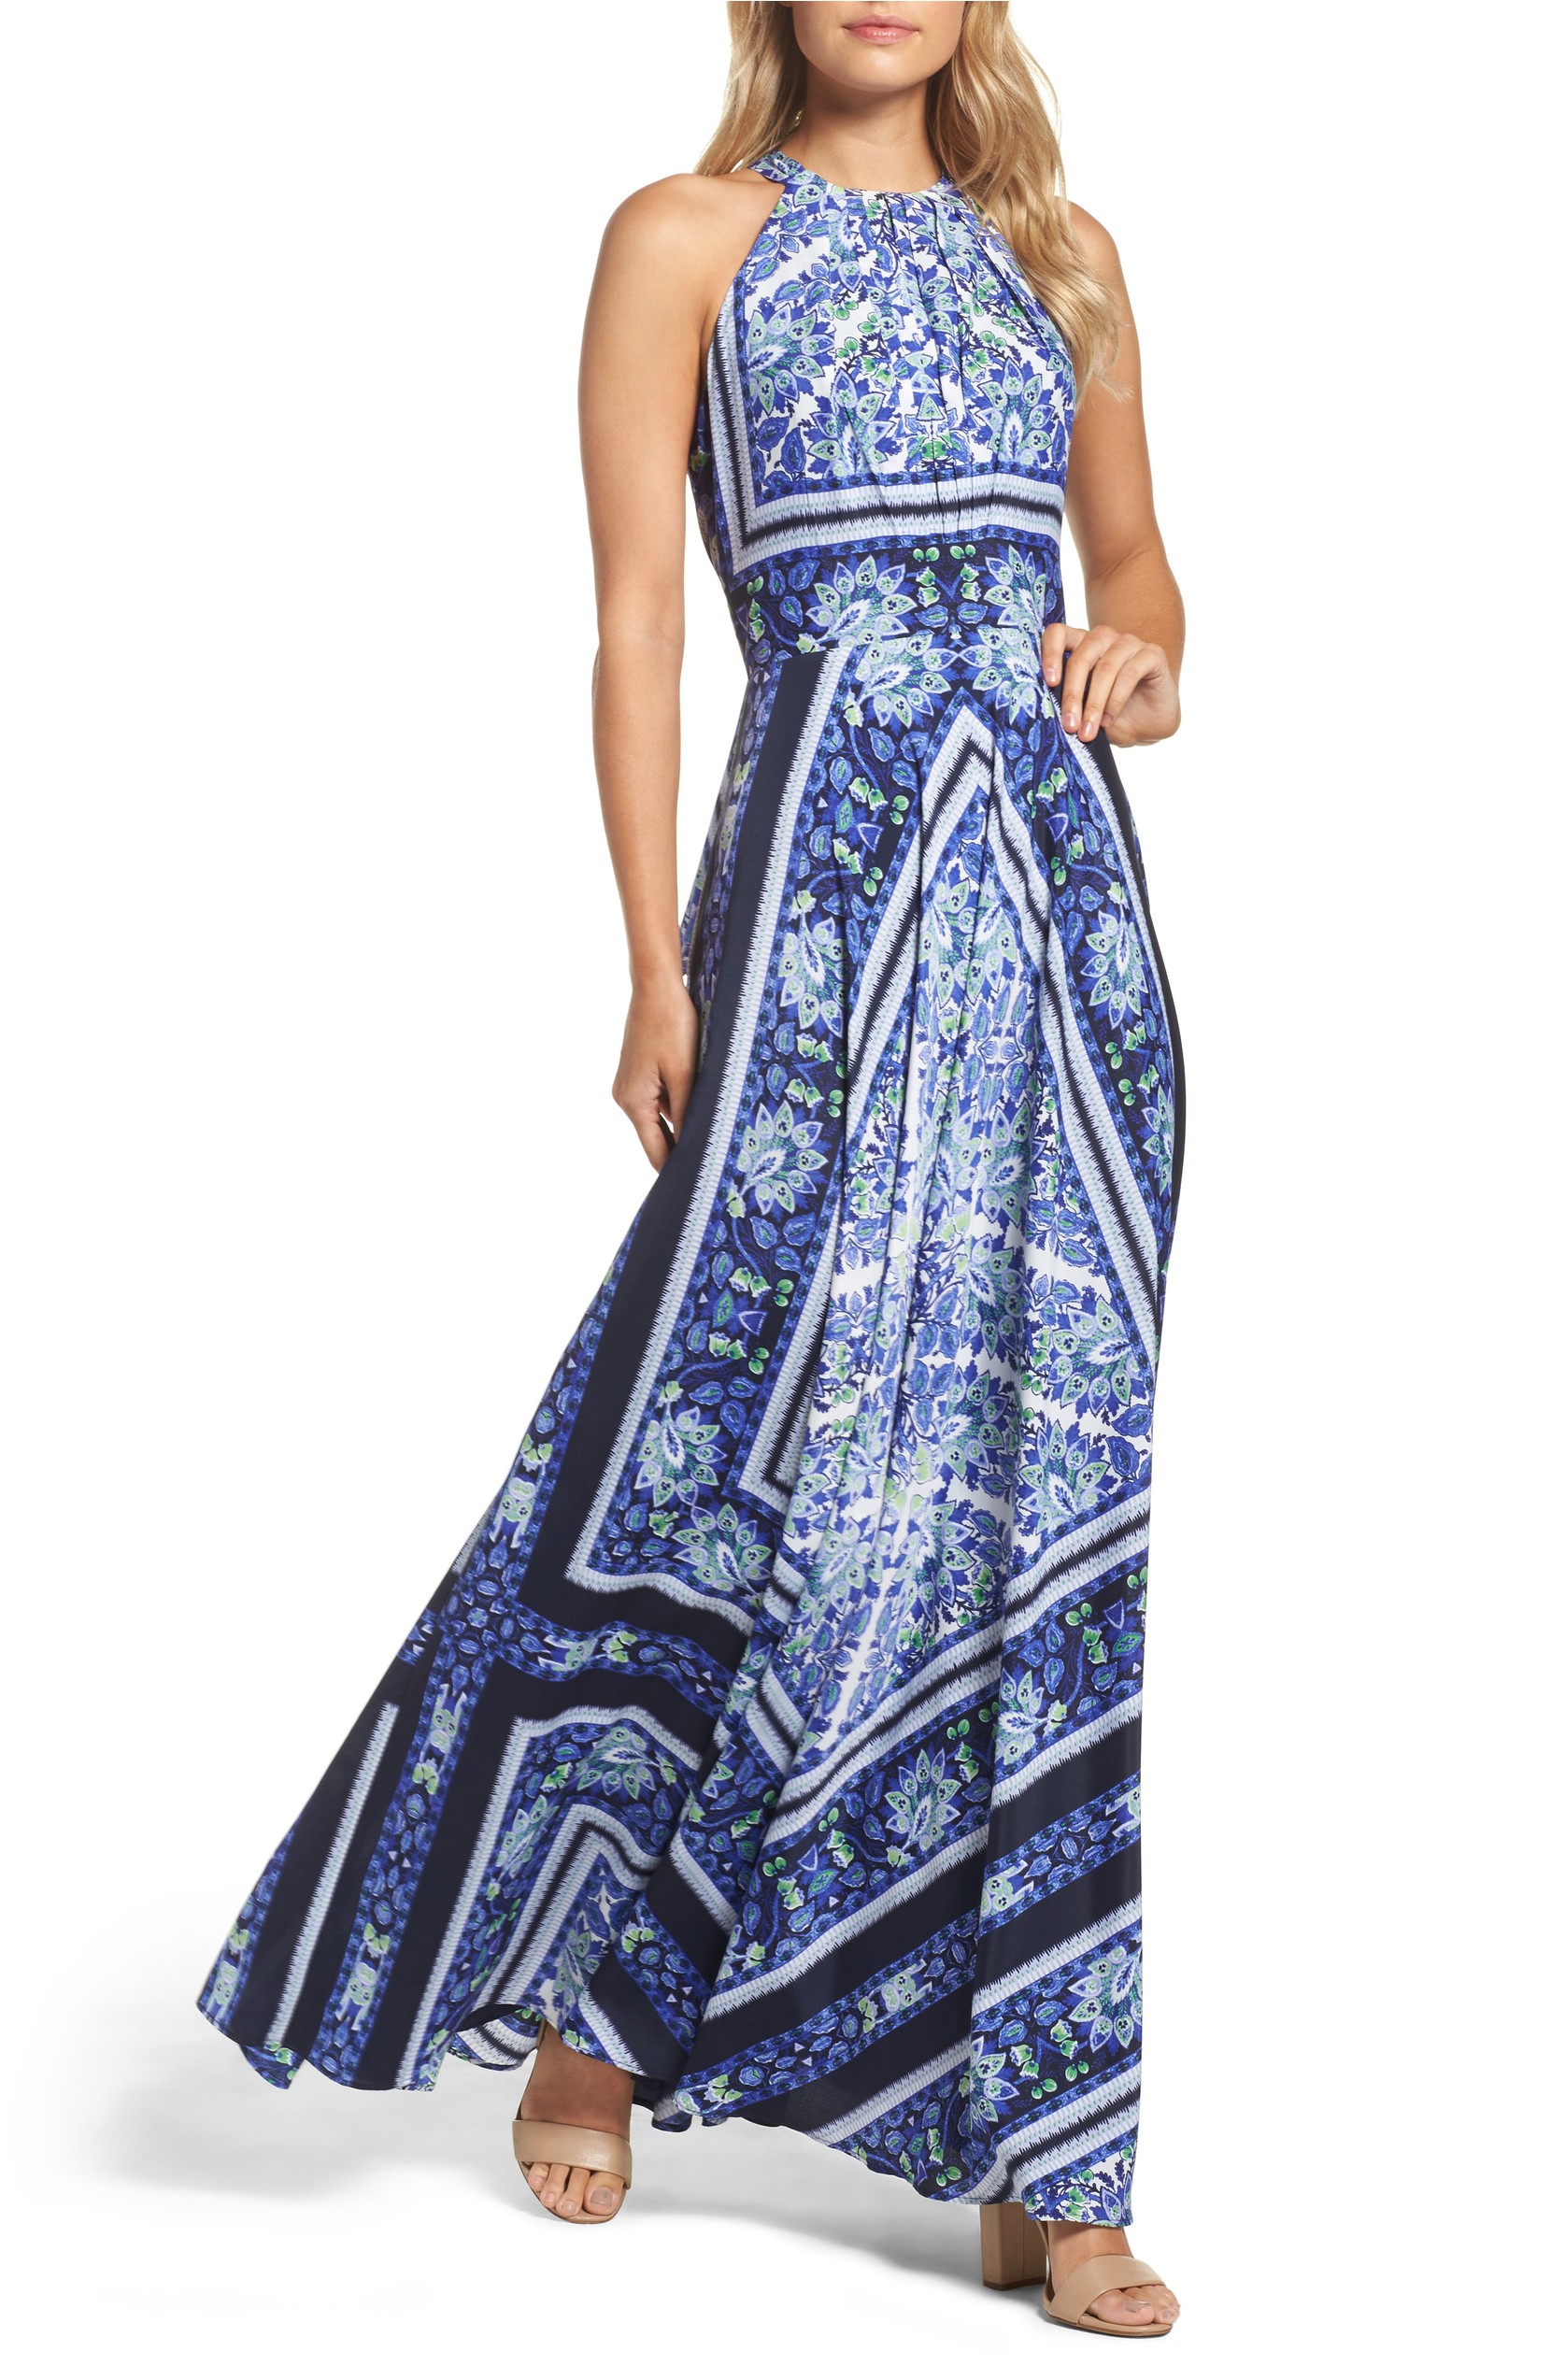 Wedding Guest Maxi Dresses — Floral, Scarf, Wrap | Us Weekly